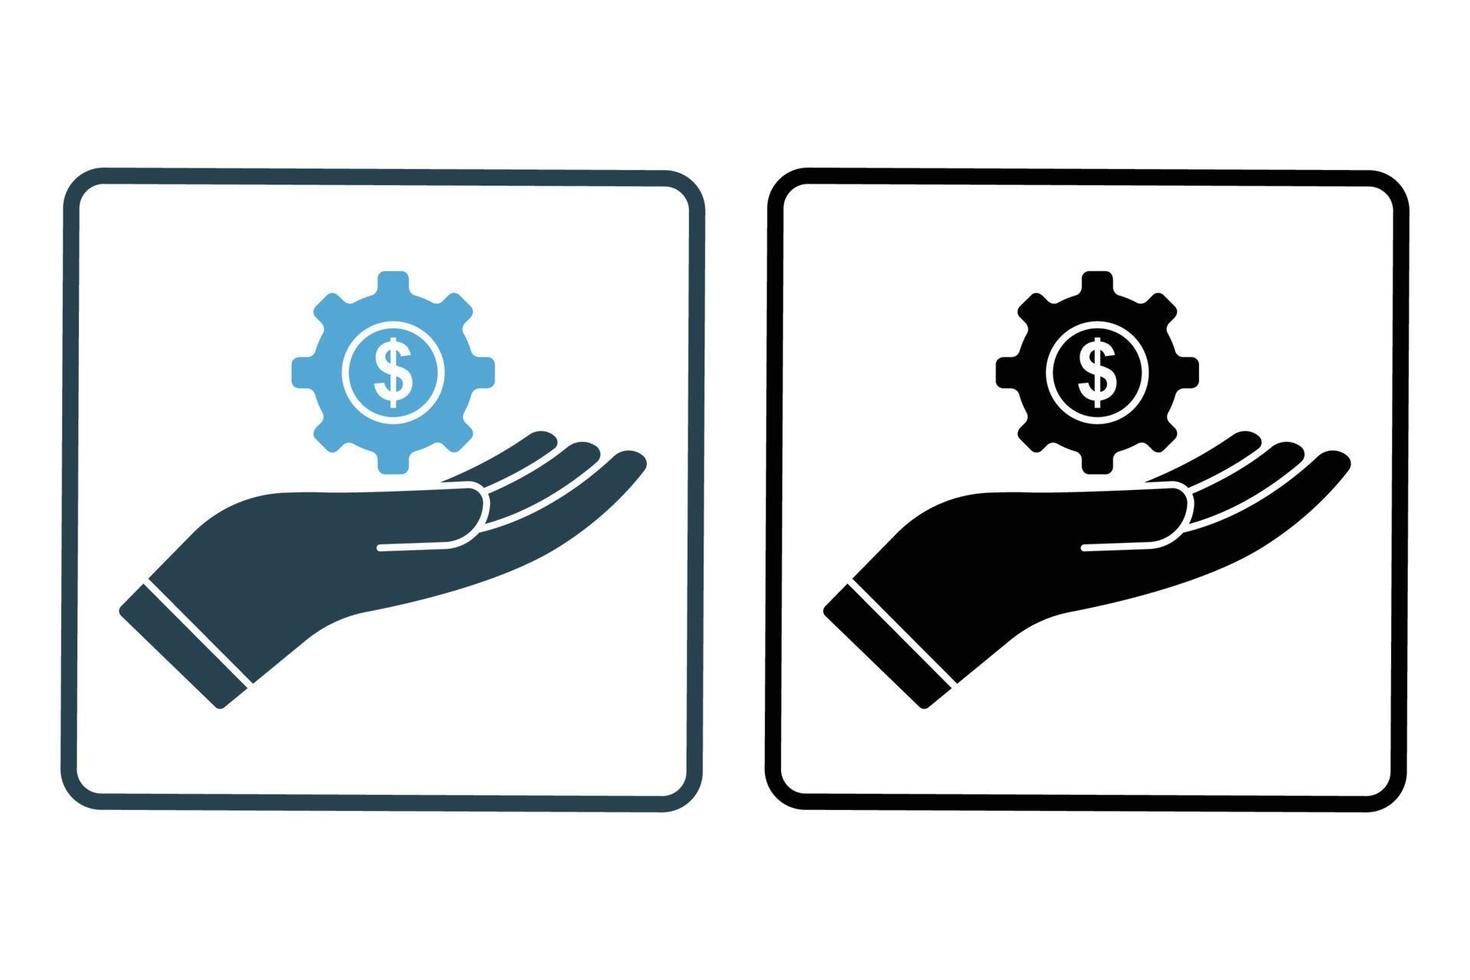 Financial services icon illustration. Hand icon with dollar and gear. icon related to industry. Solid icon style. Simple vector design editable